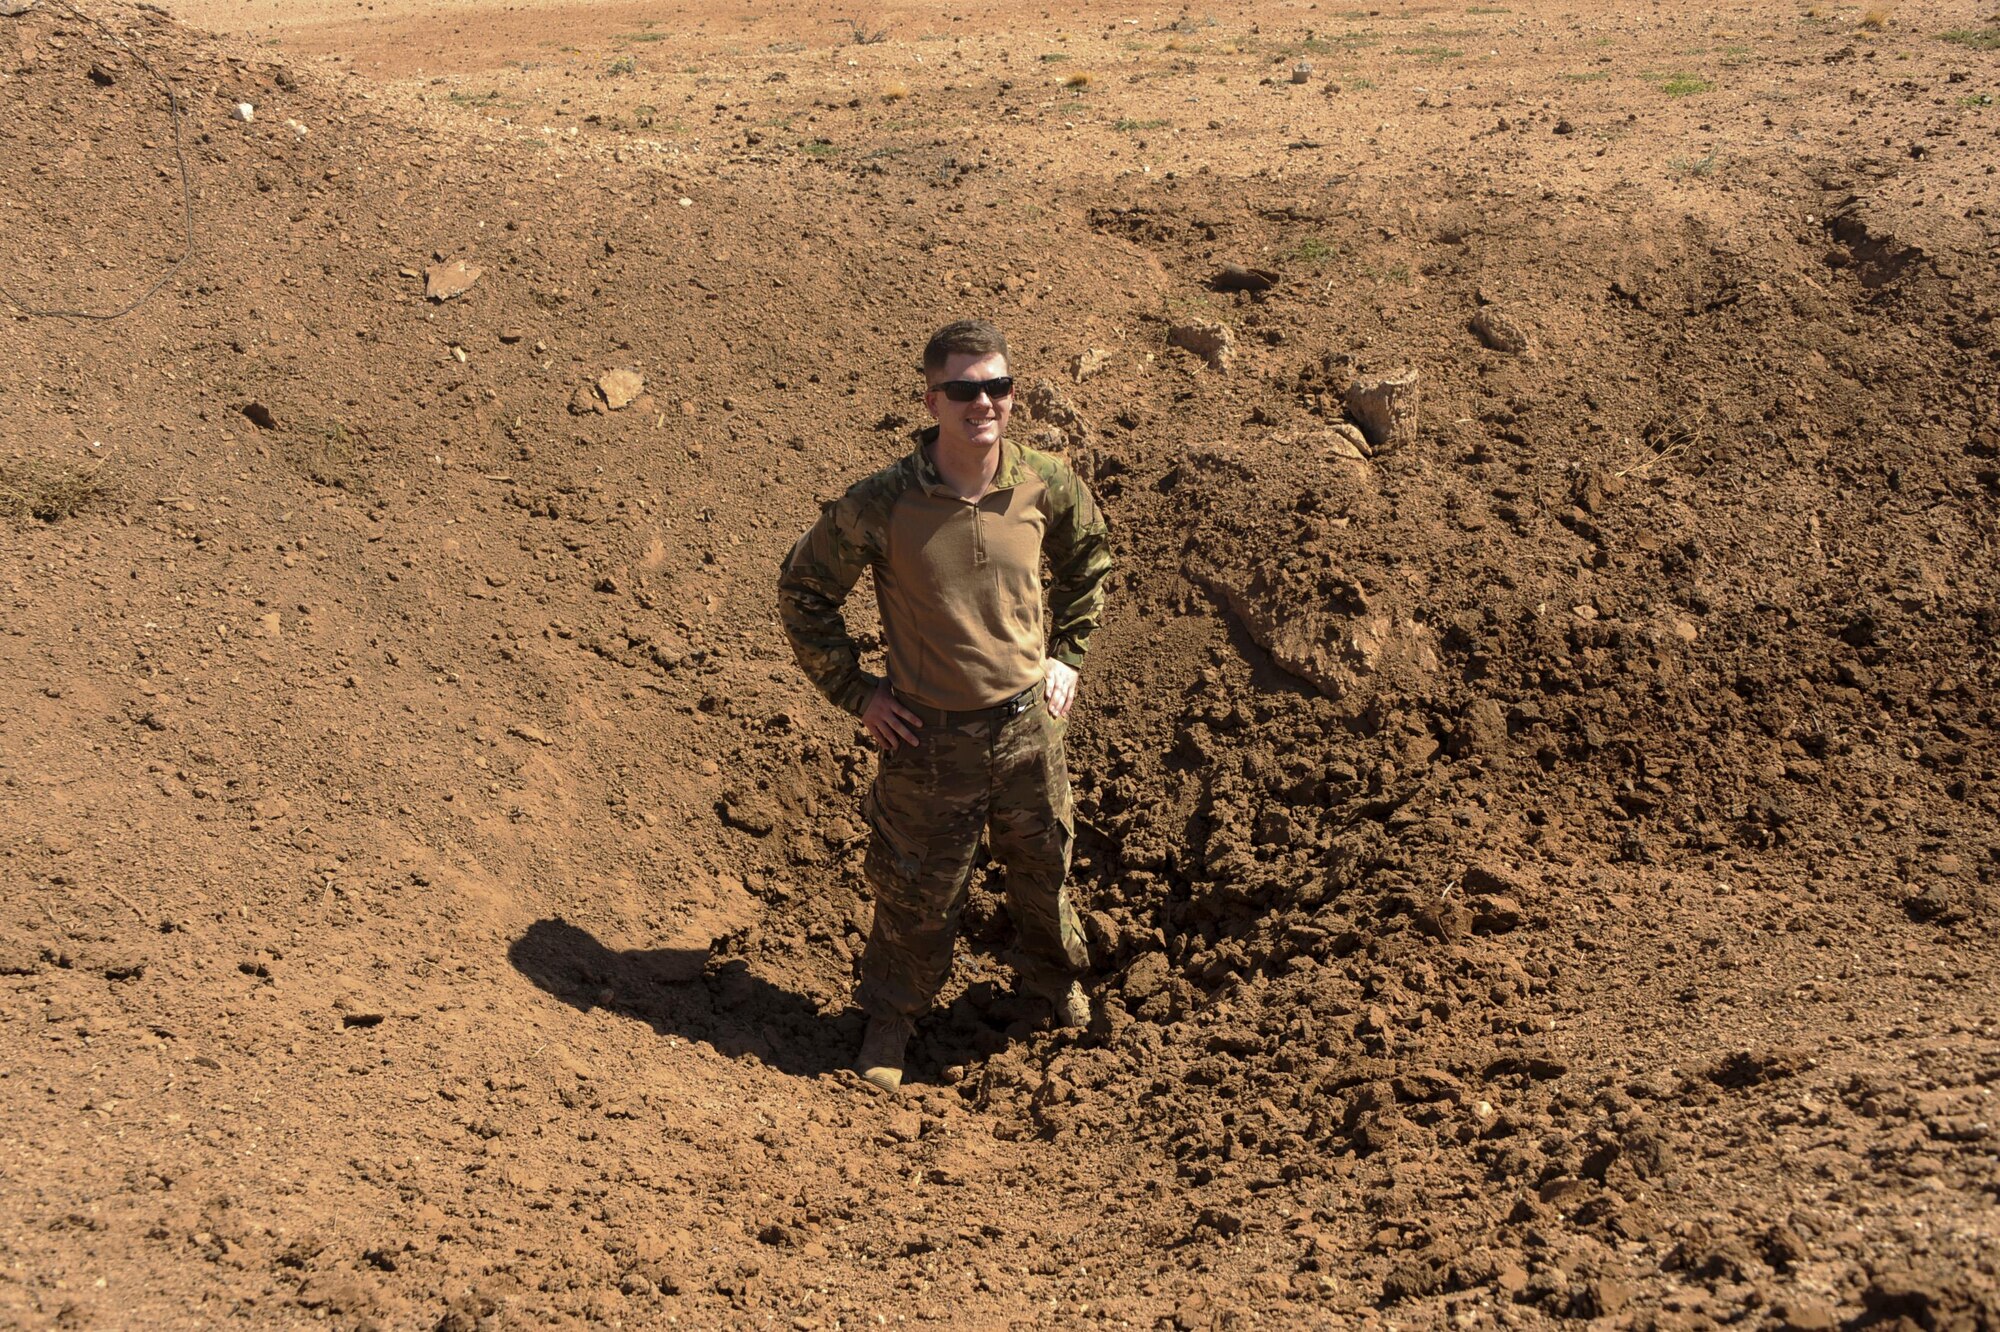 Staff Sgt. Michael McNally, 355th Maintenance Group scheduler, stands in a pit during an explosive ordnance disposal immersion course at Davis-Monthan Air Force Base, Ariz., June 28, 2016. The career field may attract Airmen because of how the risks involved encourage strong bonds between wingmen. (U.S. Air Force photo by Airman Nathan H. Barbour/Released)